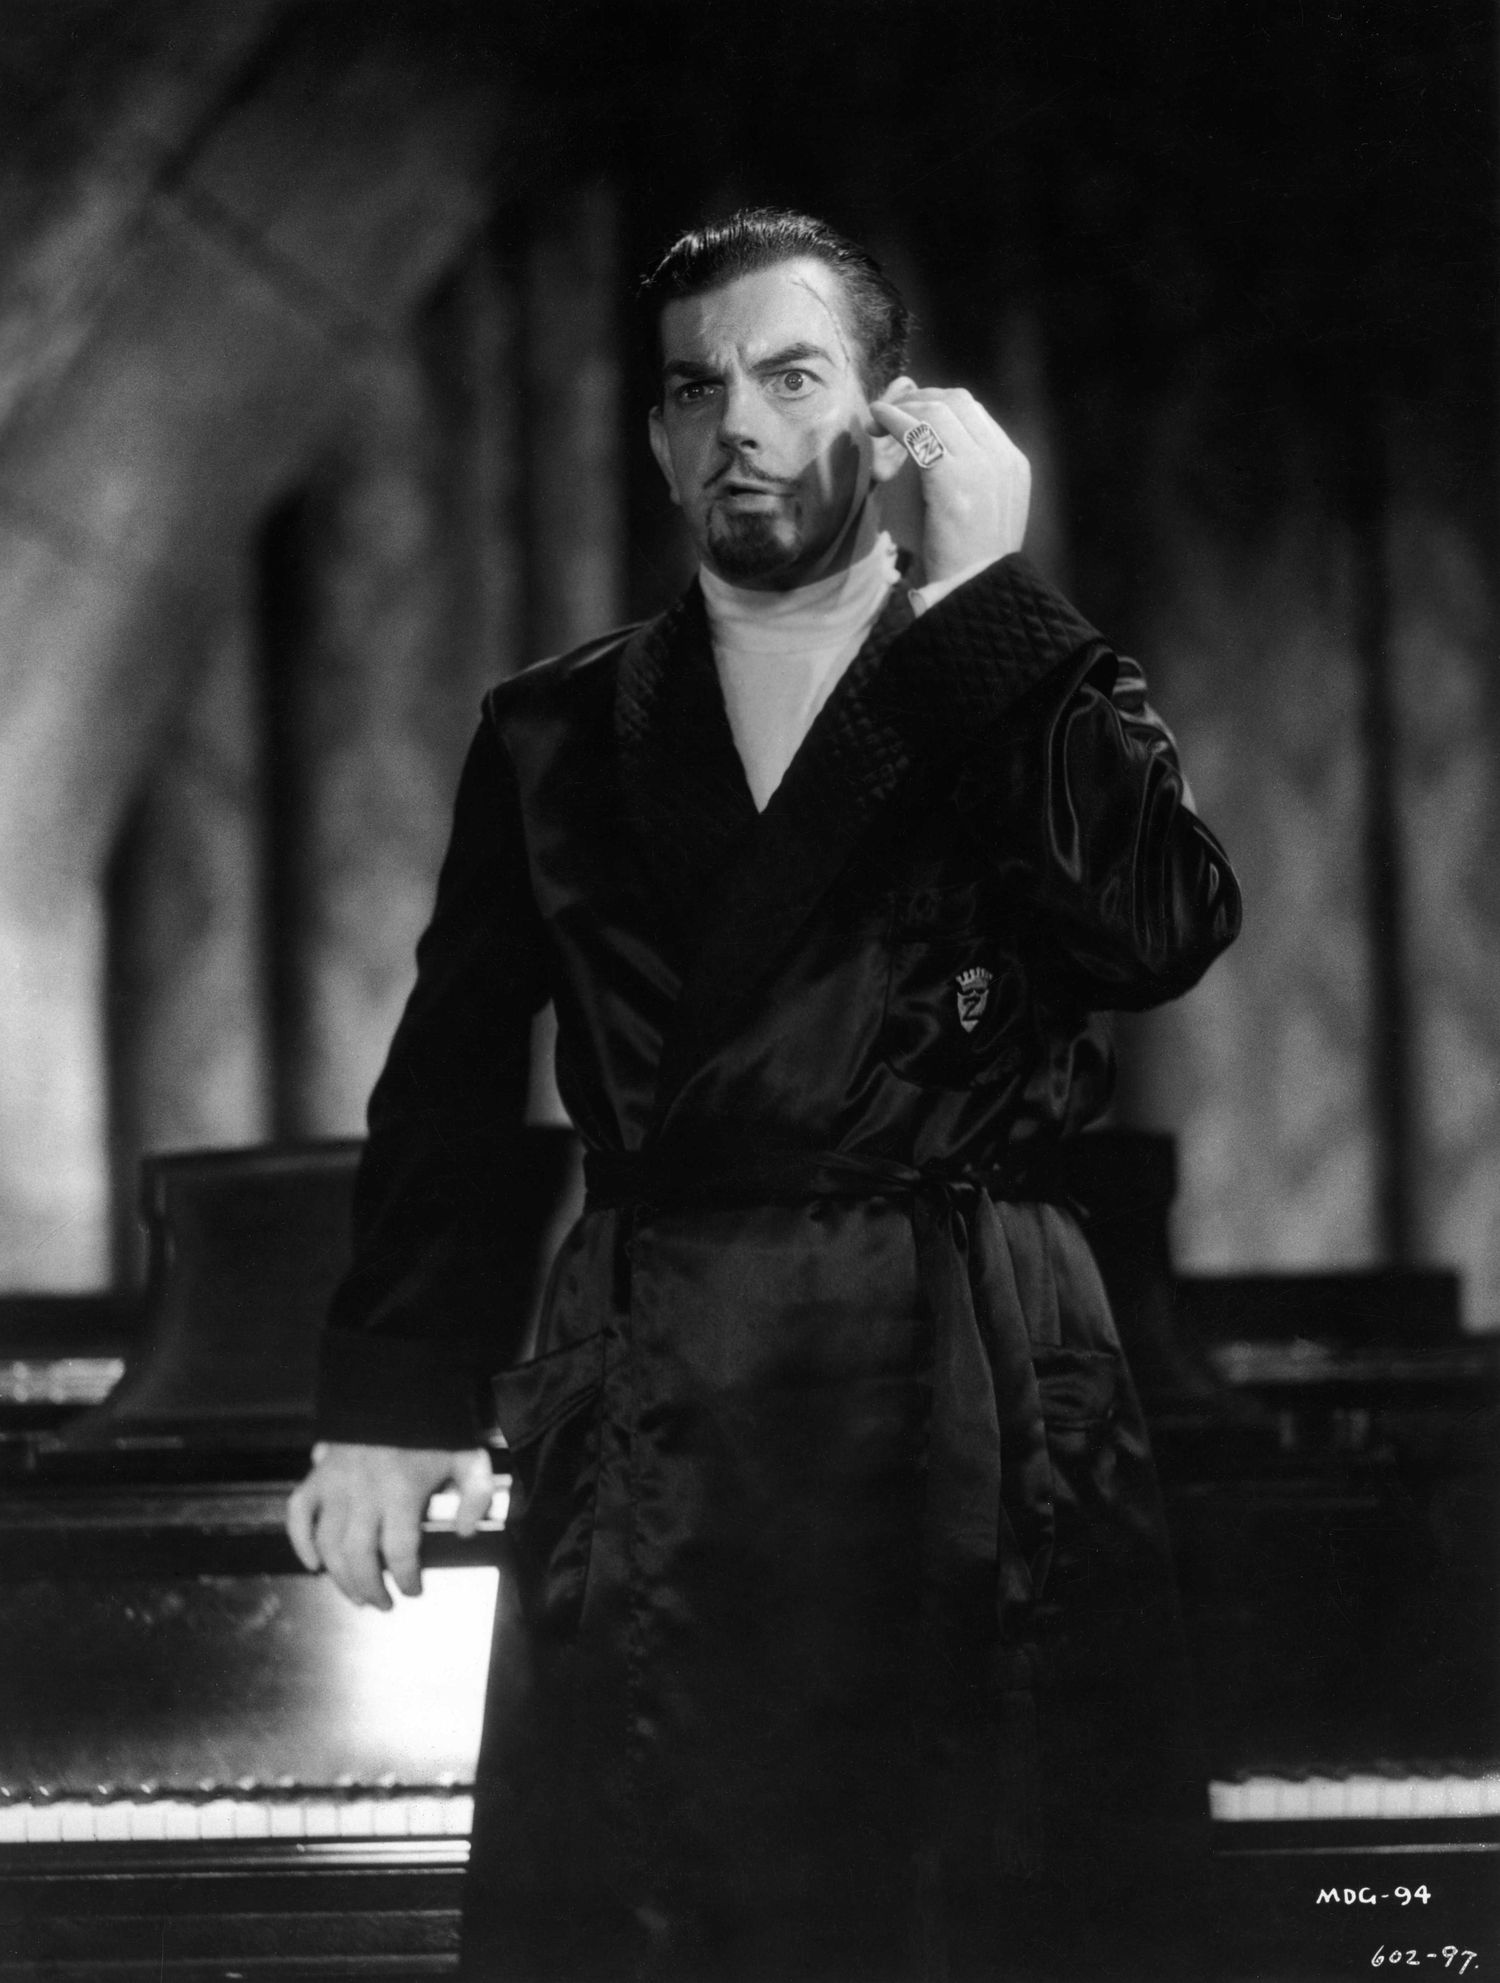 LESLIE BANKS as Count Zaroff THE MOST DANGEROUS GAME / THE HOUNDS OF ZAROFF 1932 directors Irving Pichel and Ernest B. Schoedsack novel Richard Connell RKO Radio Pictures. Image shot 1932. Exact date unknown.